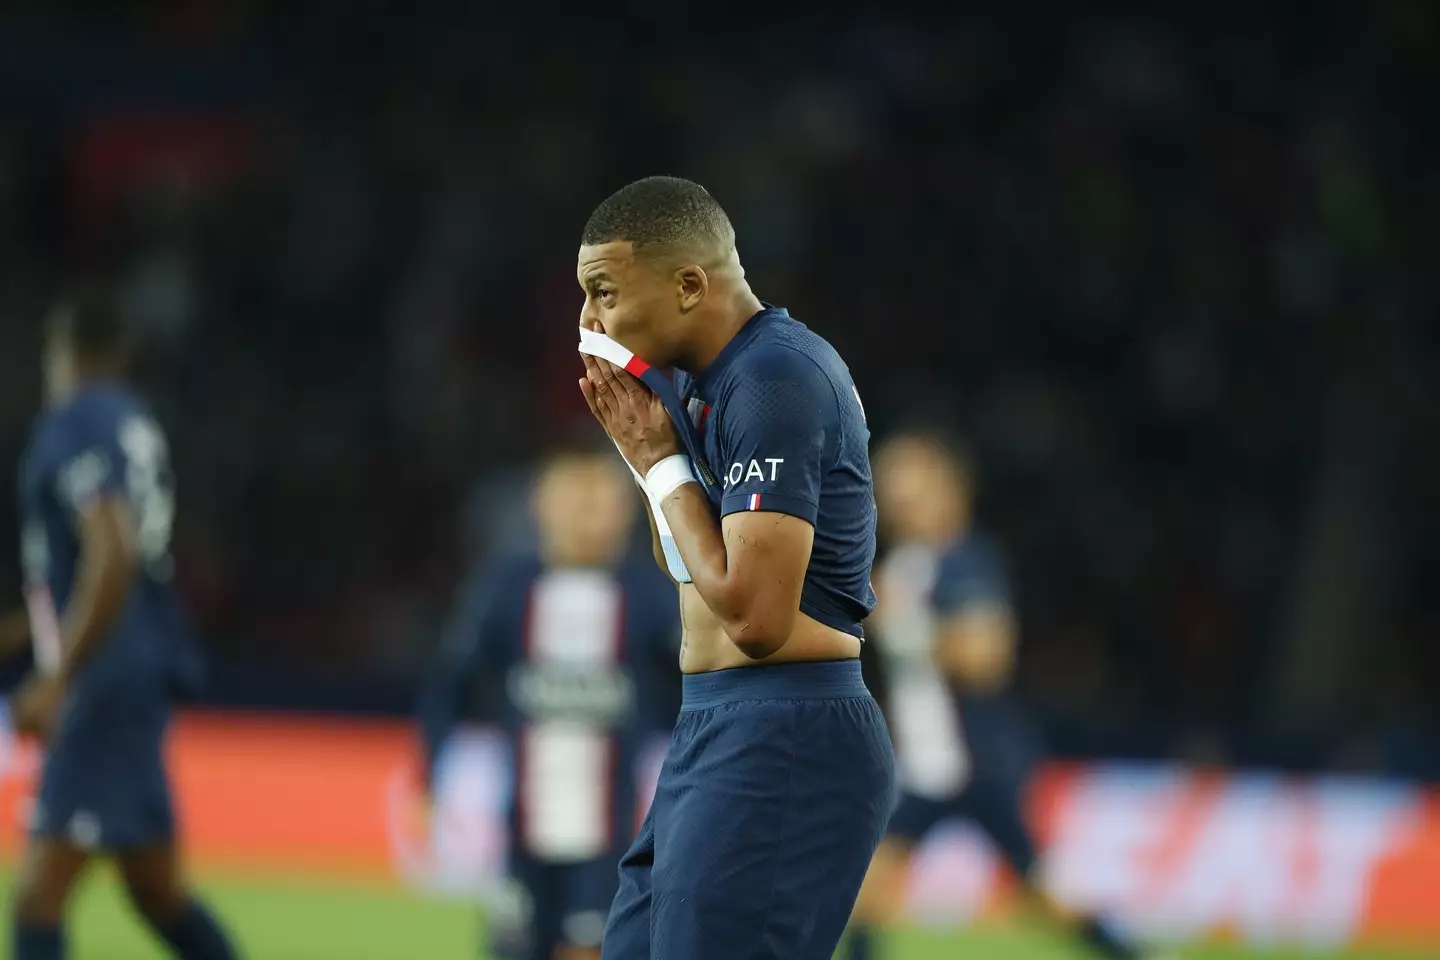 Mbappe is reportedly unhappy at PSG. Image: Alamy